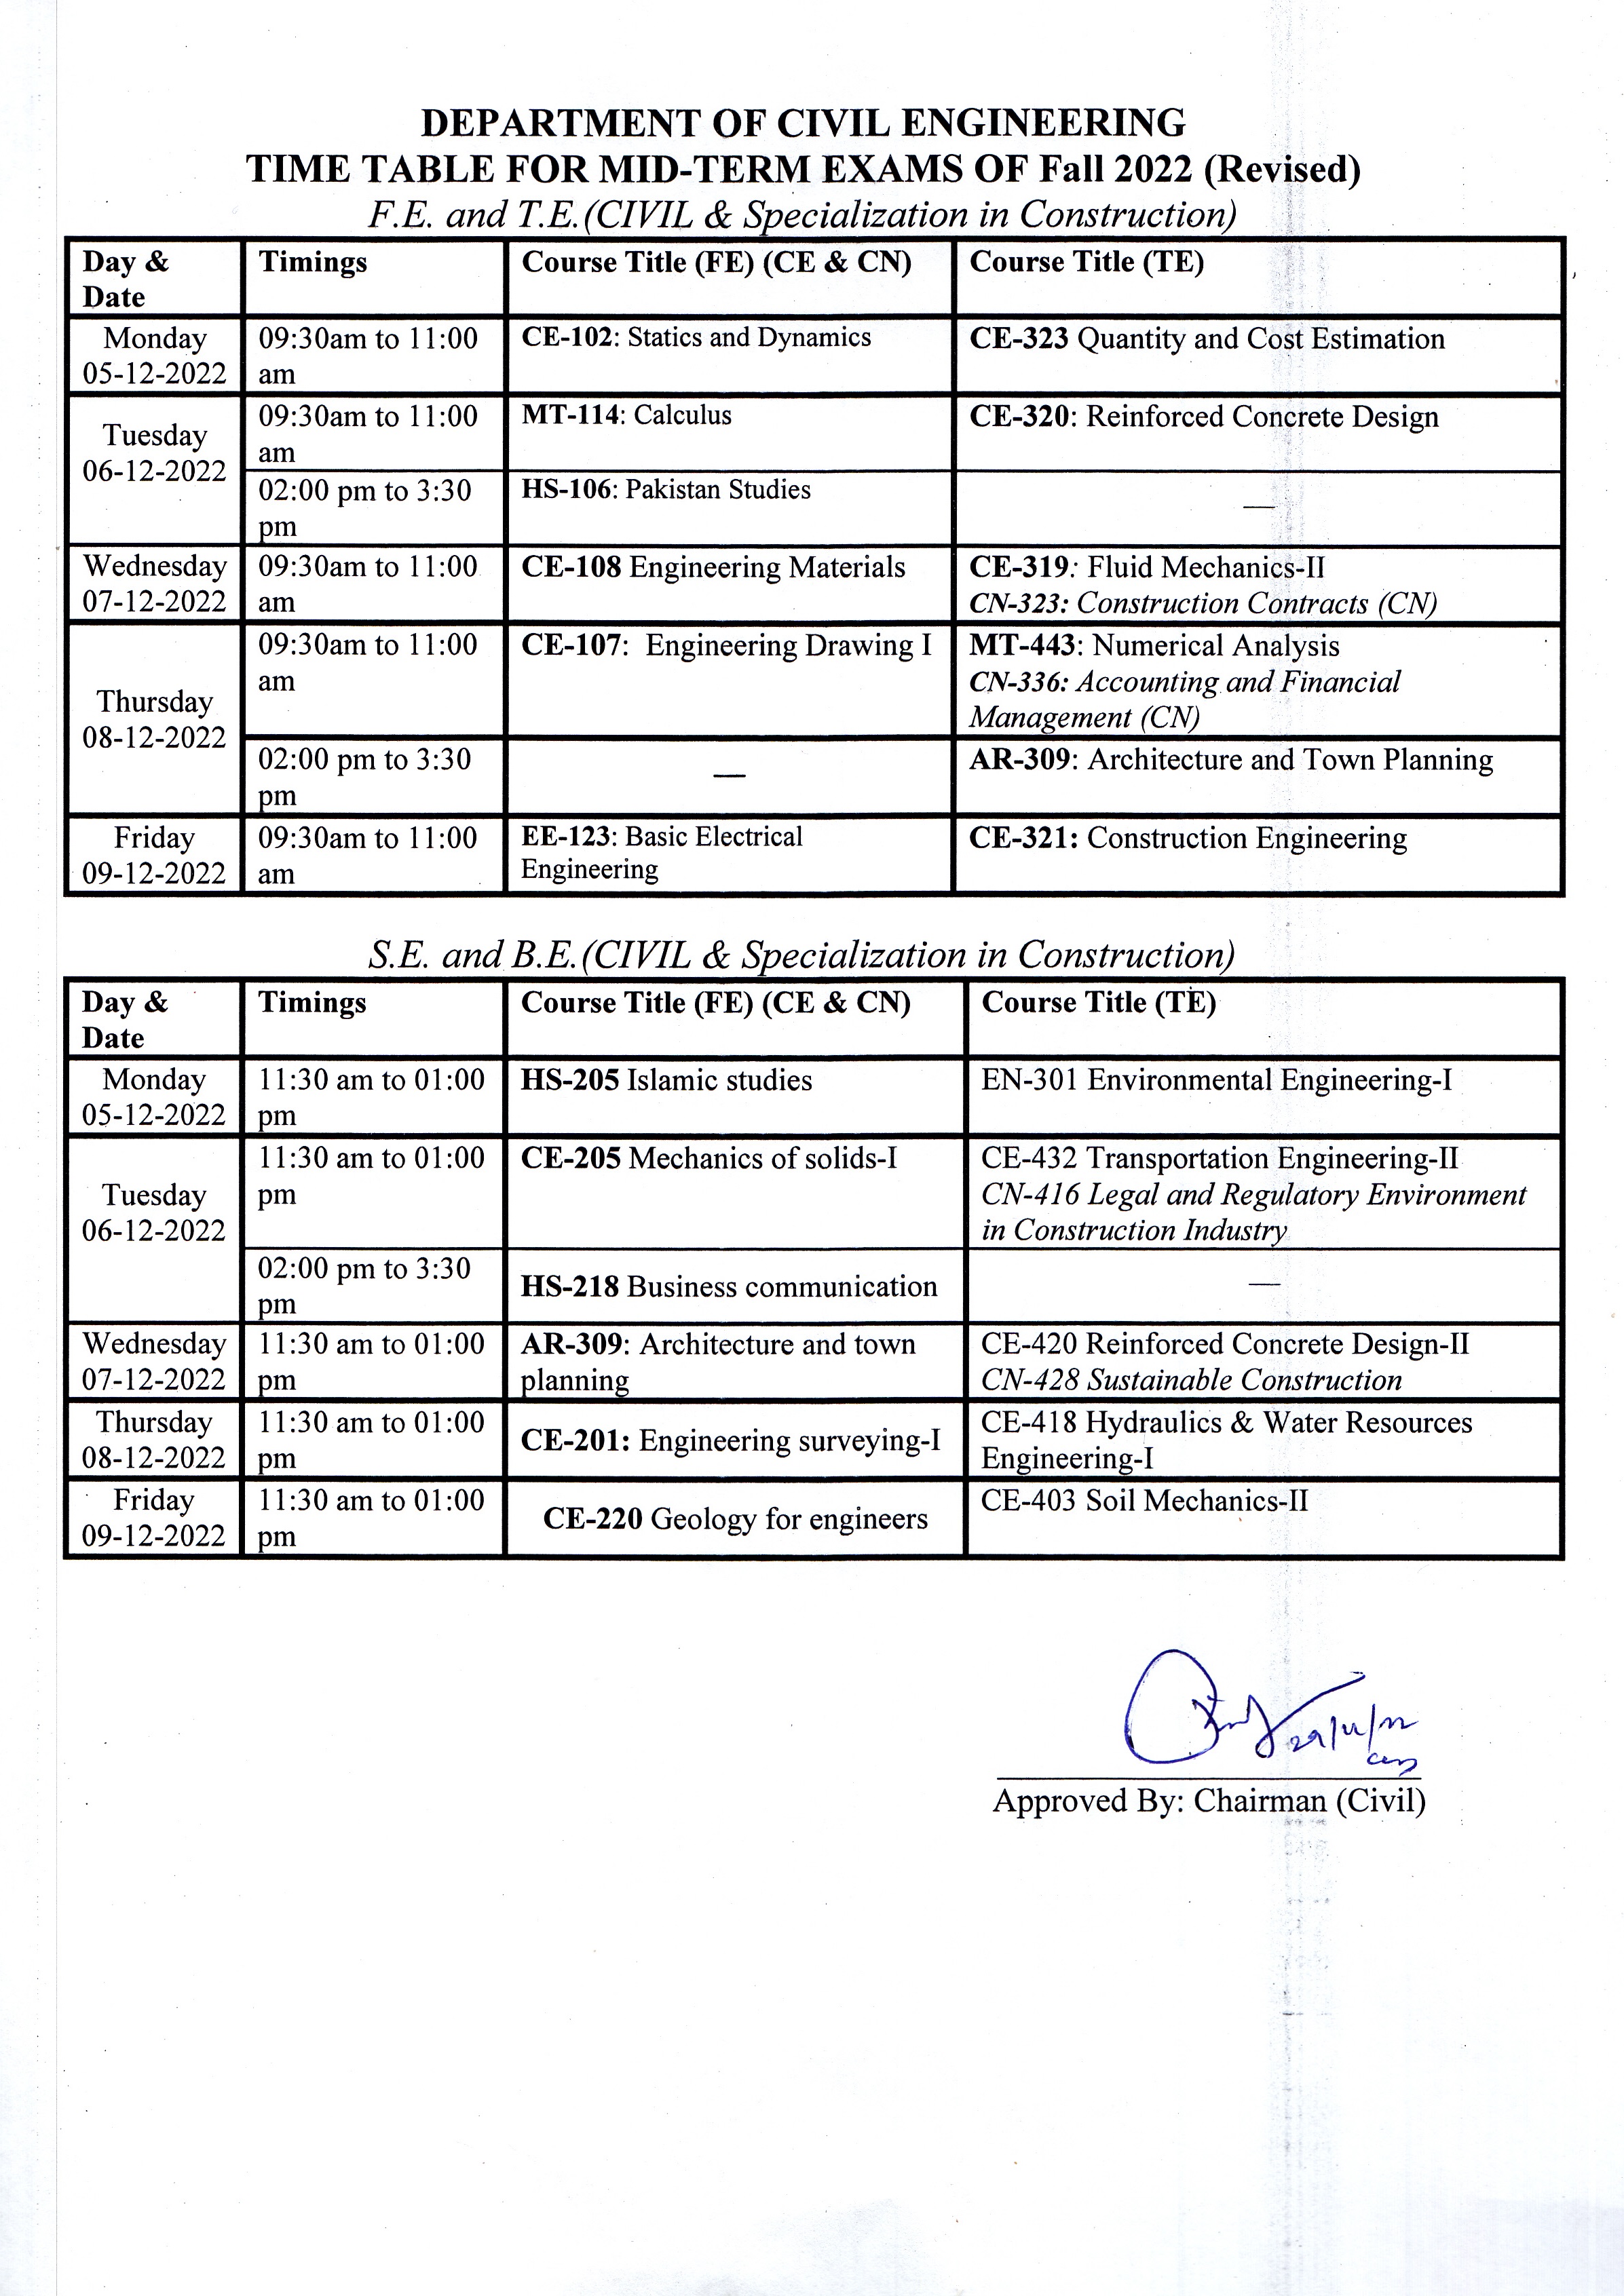 Time table for mid term exam